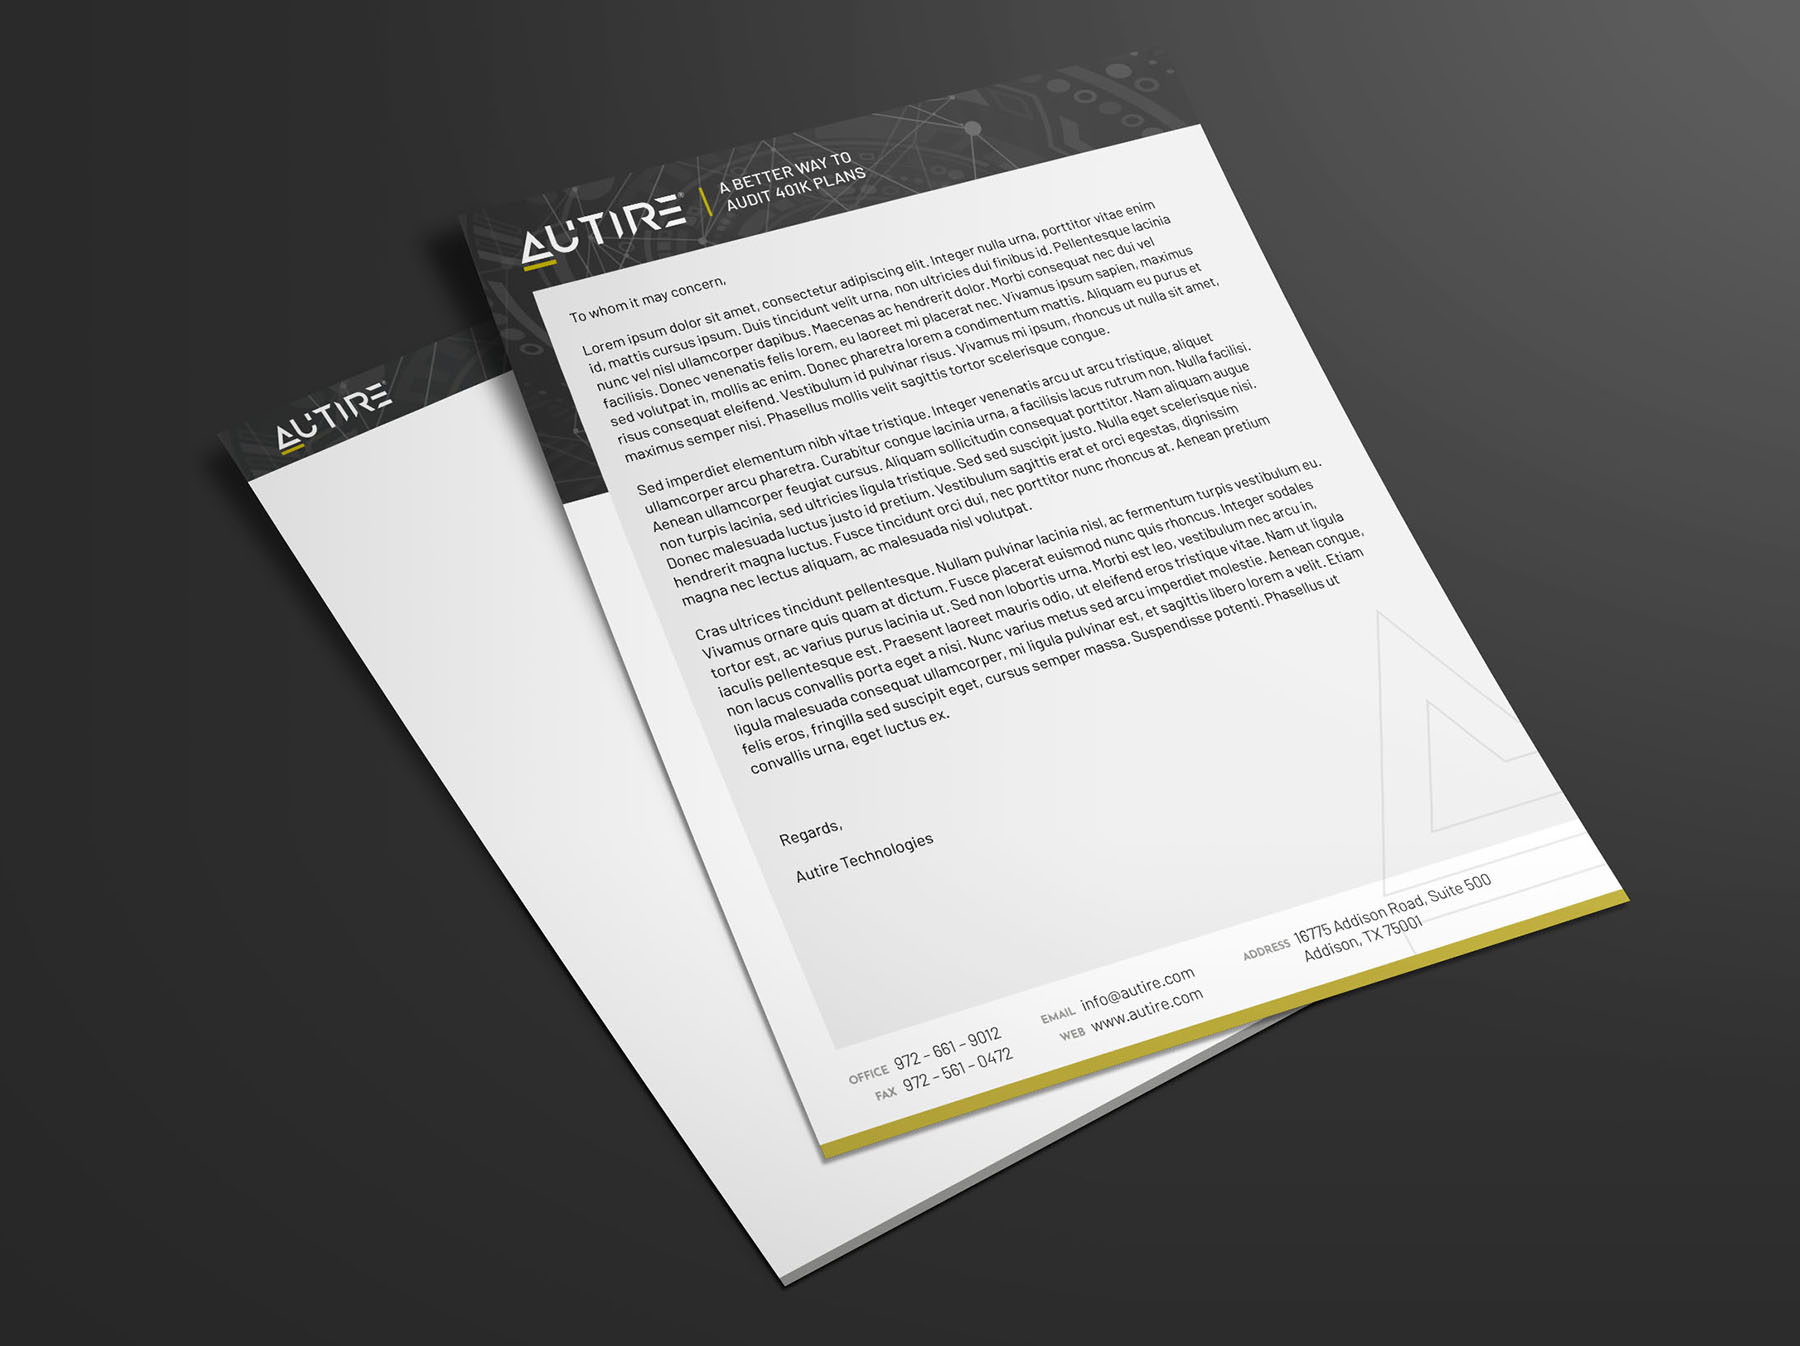 Autire letterhead design, with a cover page and internal page design, displayed on a table